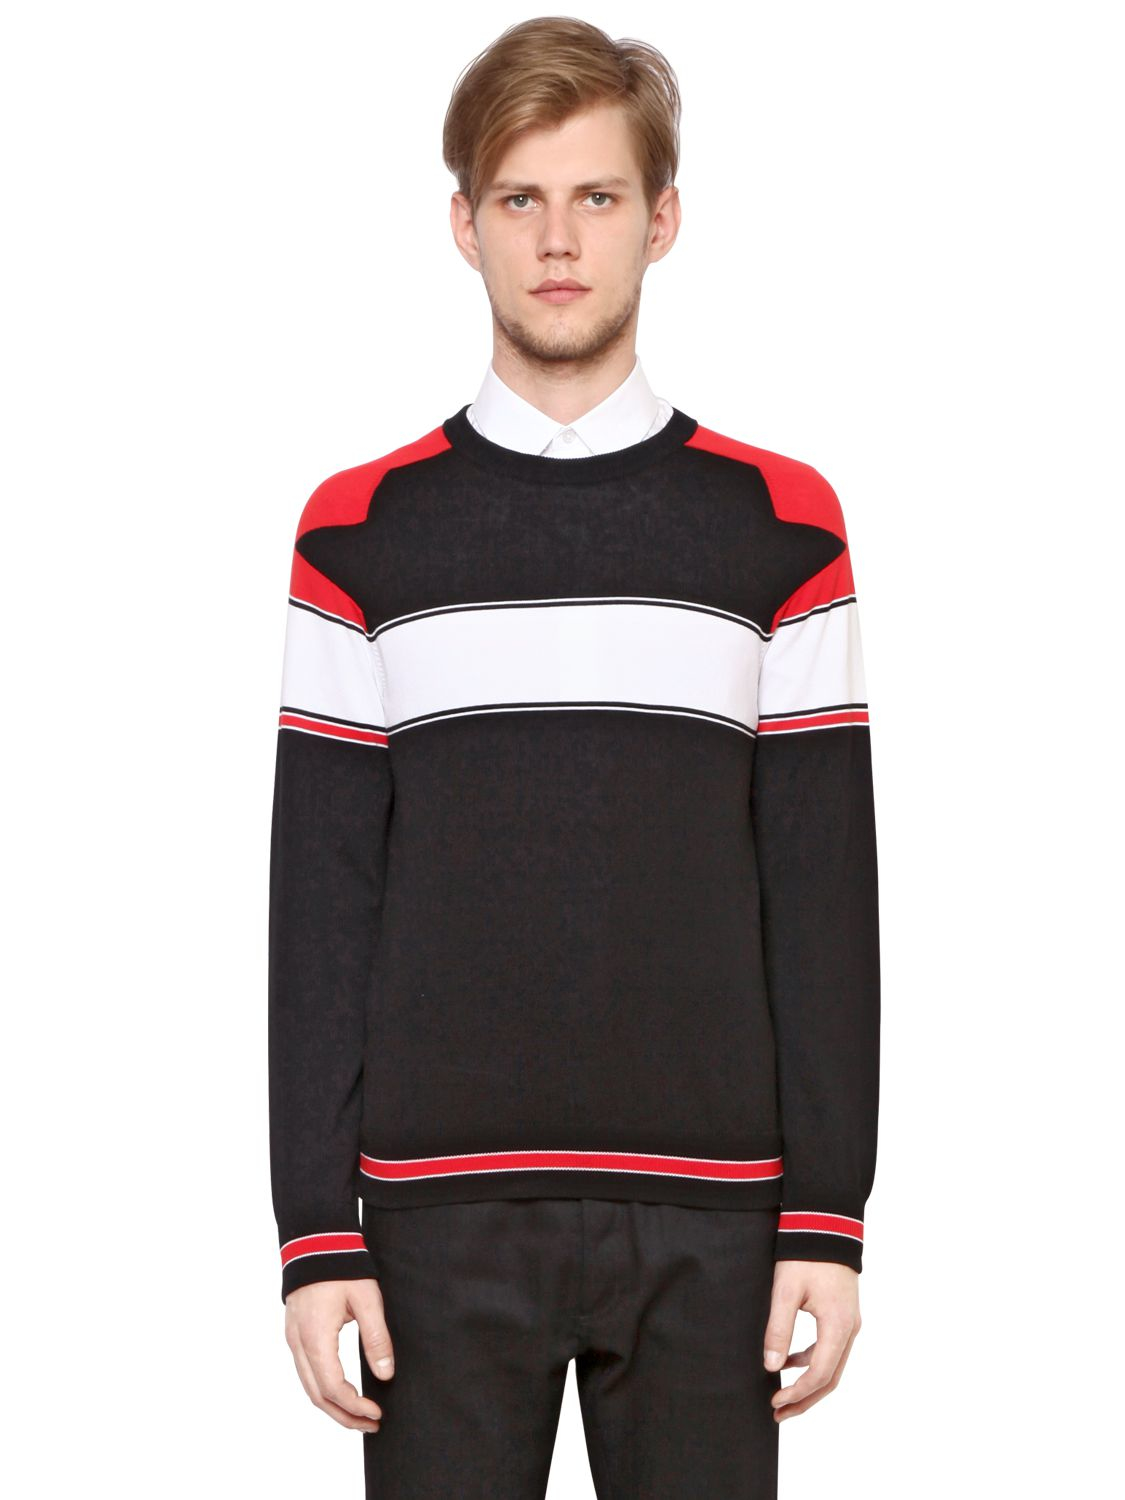 Givenchy Geometric Intarsia Cotton Sweater in Black/Red/White (Black ...